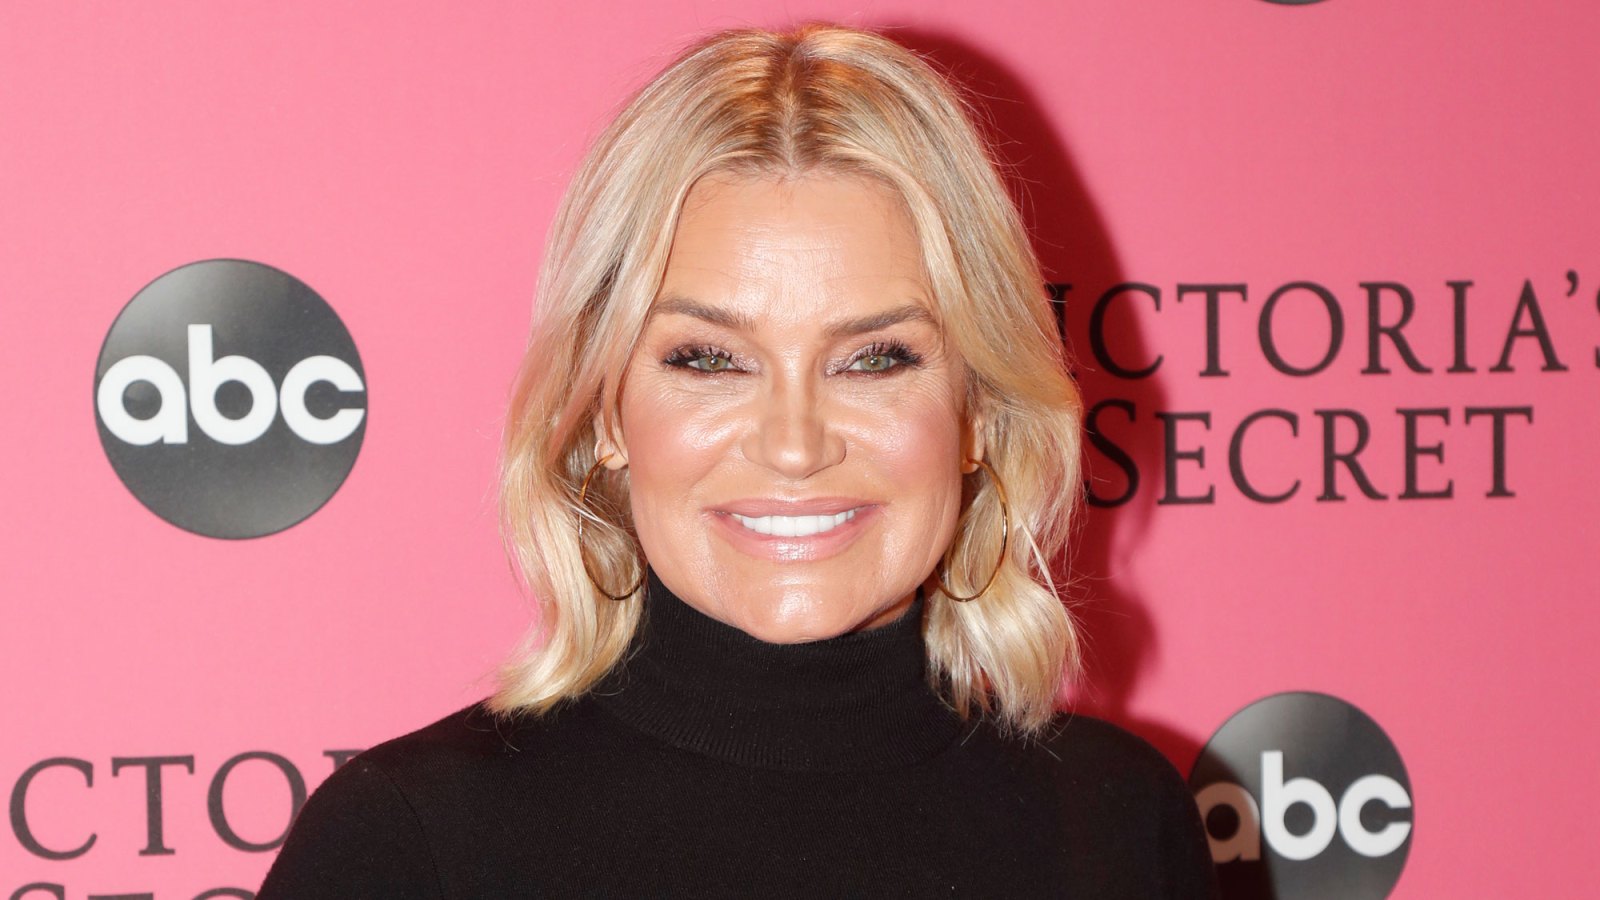 Yolanda Hadid Spotted Looking ‘Close and Affectionate’ With Mystery Man